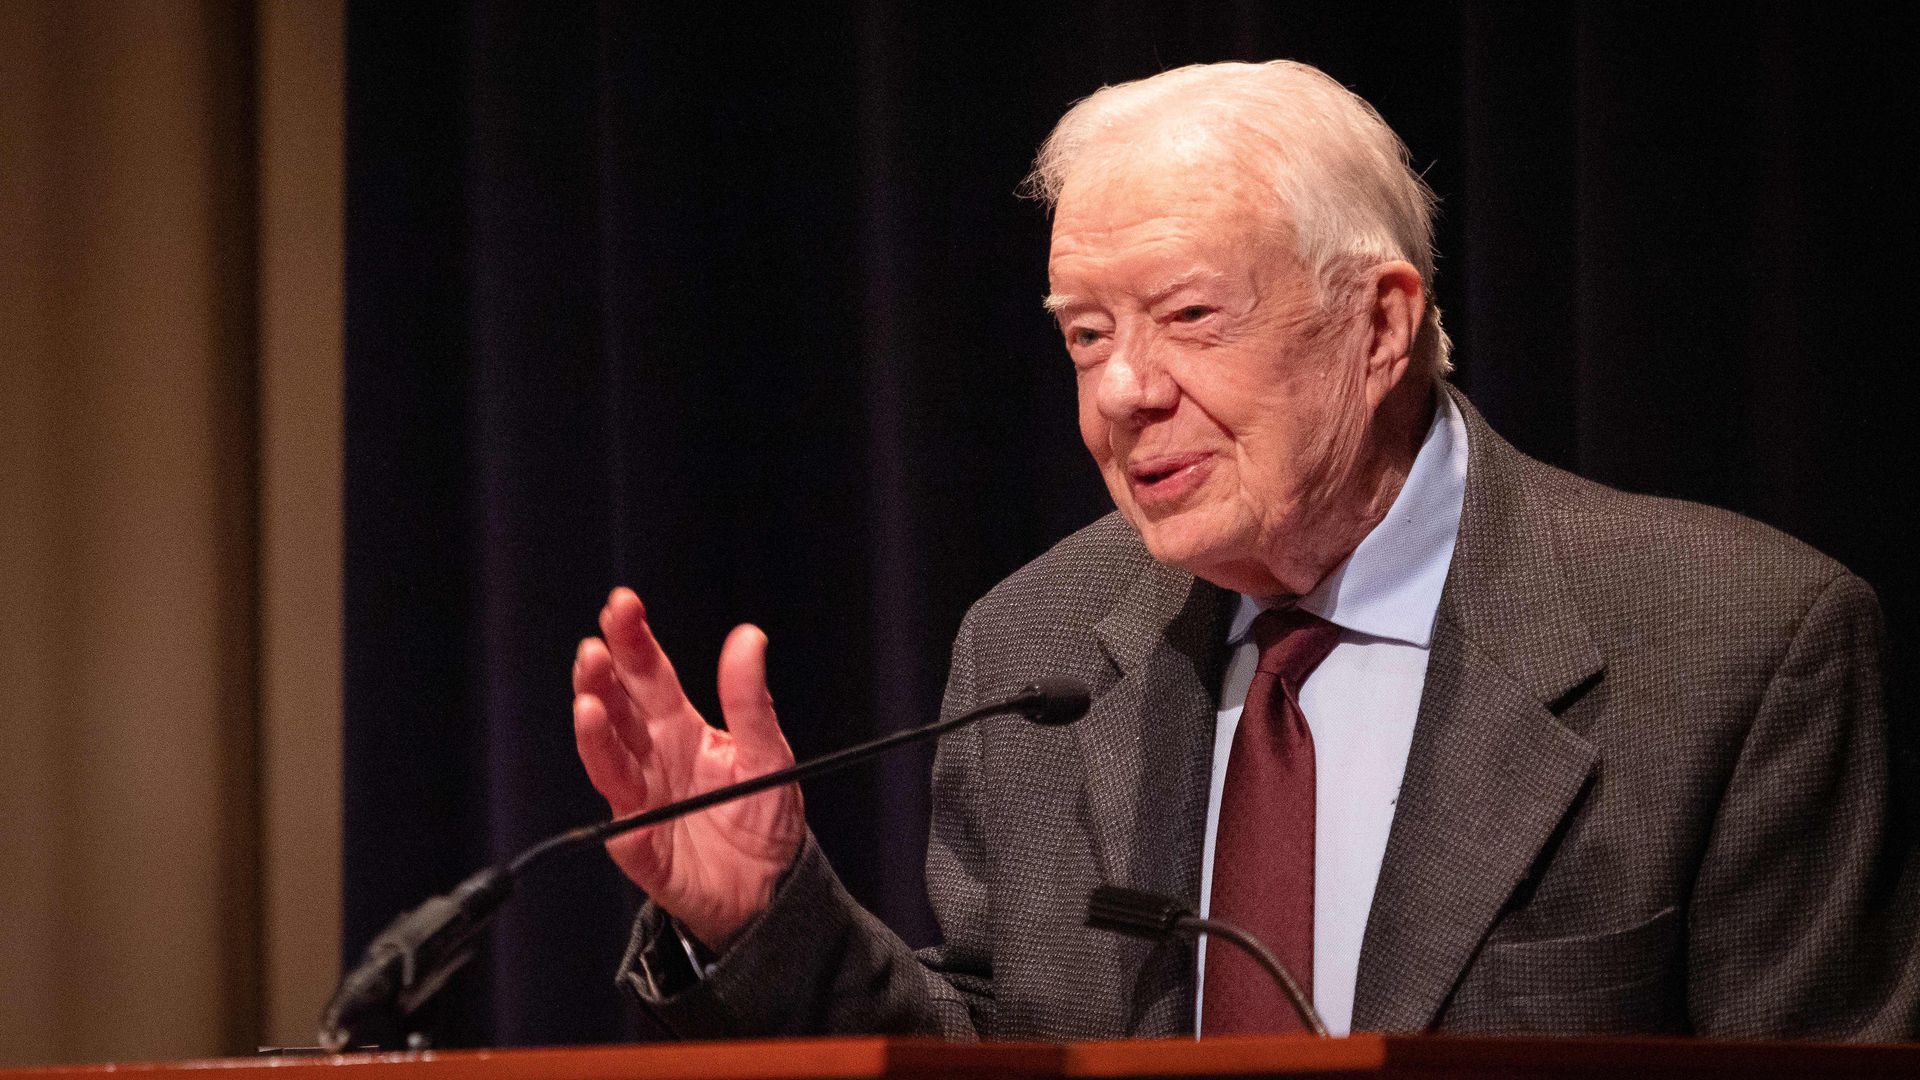 Jimmy Carter admitted back into hospital for infection